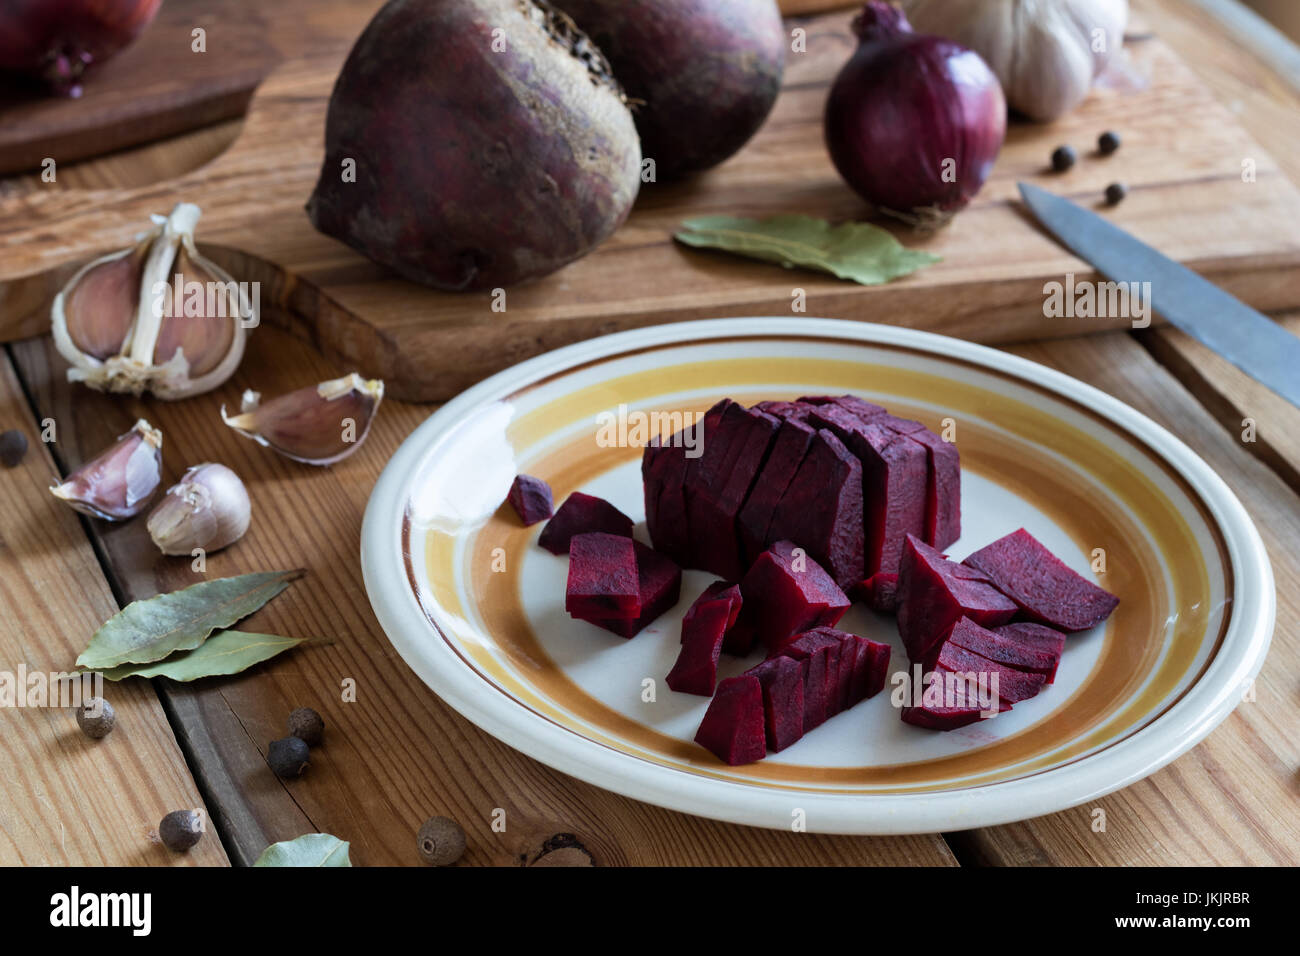 Sliced red beets on a plate, spices and other ingredients for beet kvass (fermented beets) Stock Photo